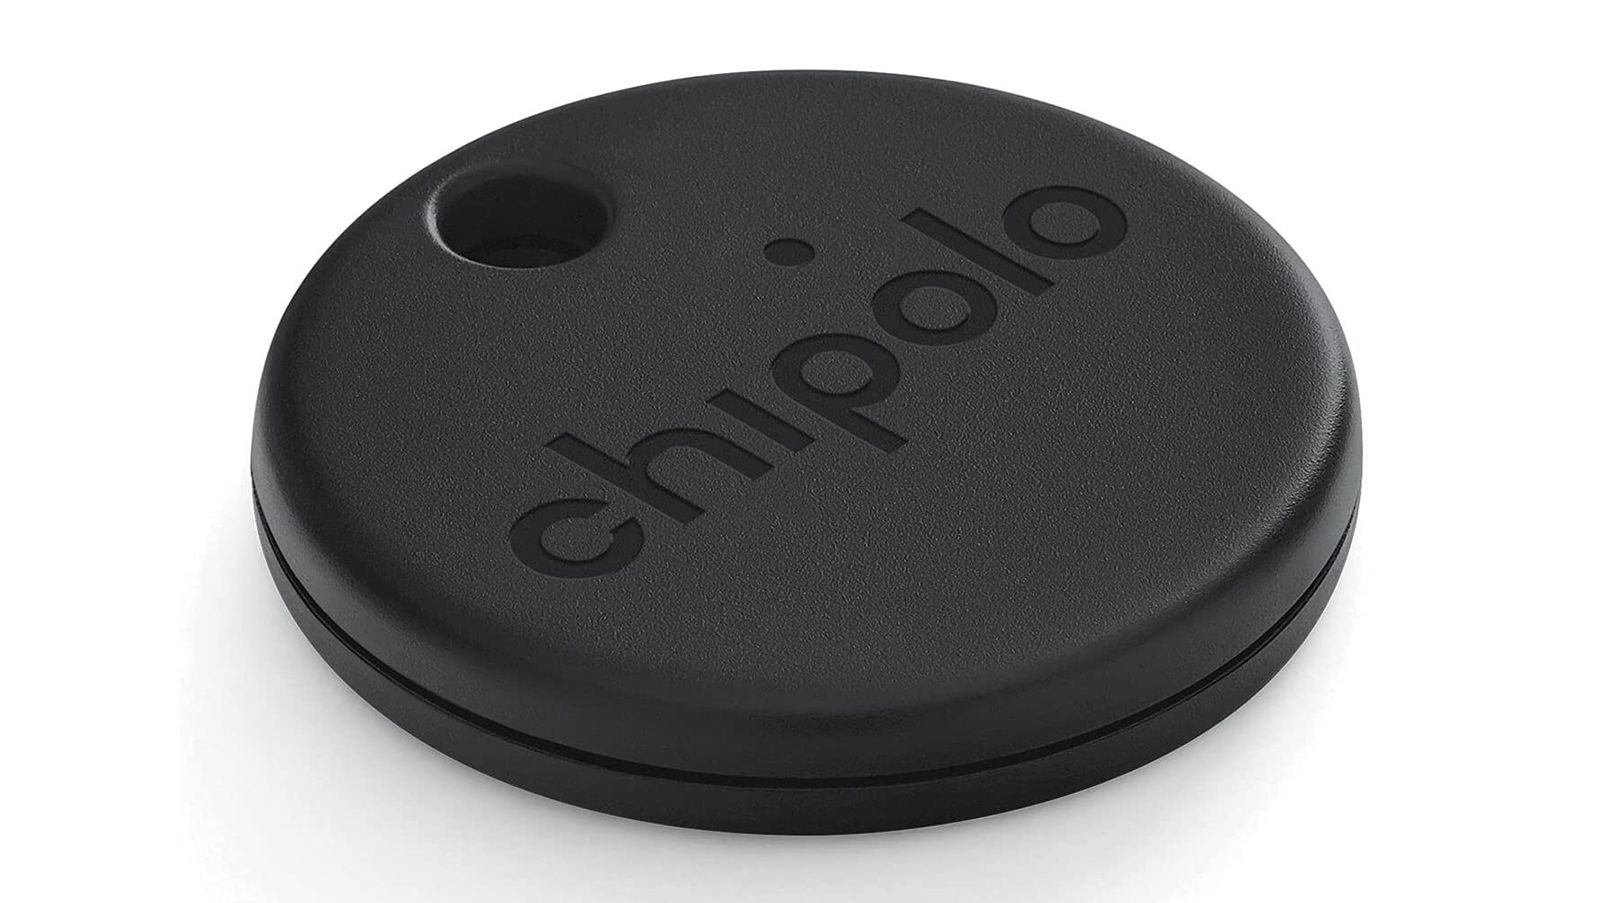 Chipolo One Spot review: A strong AirTag alternative with one big